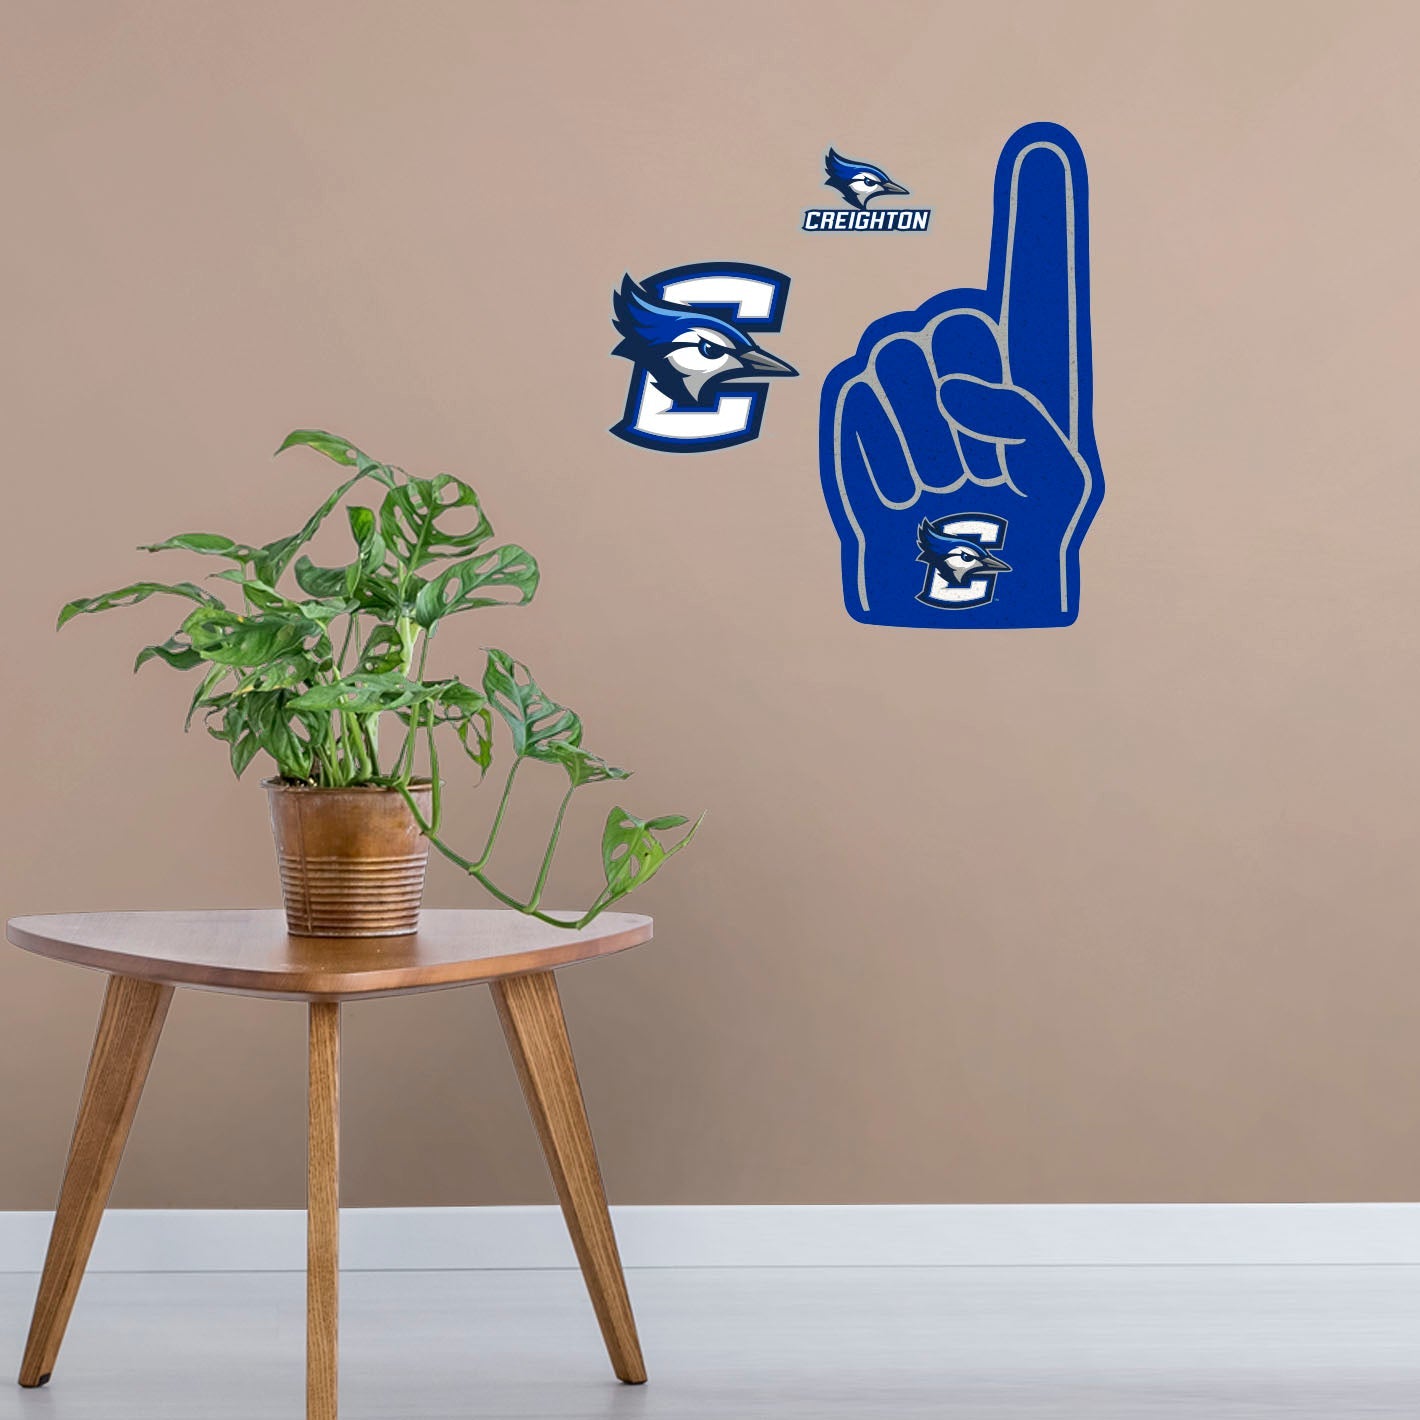 Creighton Blue Jays: Foam Finger - Officially Licensed NCAA Removable Adhesive Decal